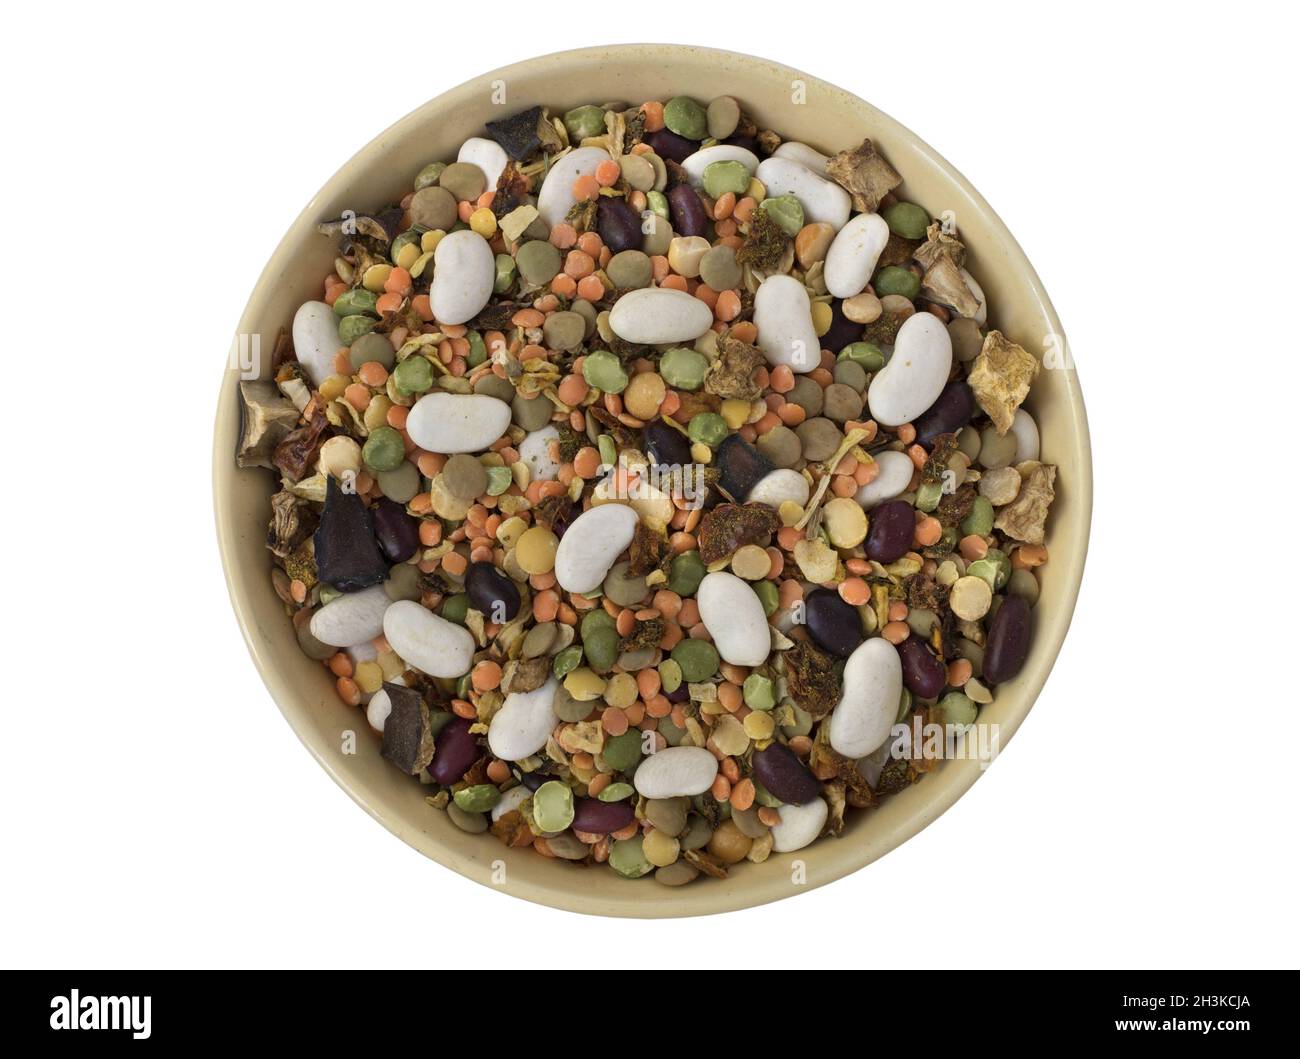 Dried Legumes Soup Mix in a bowl, close up. Stock Photo